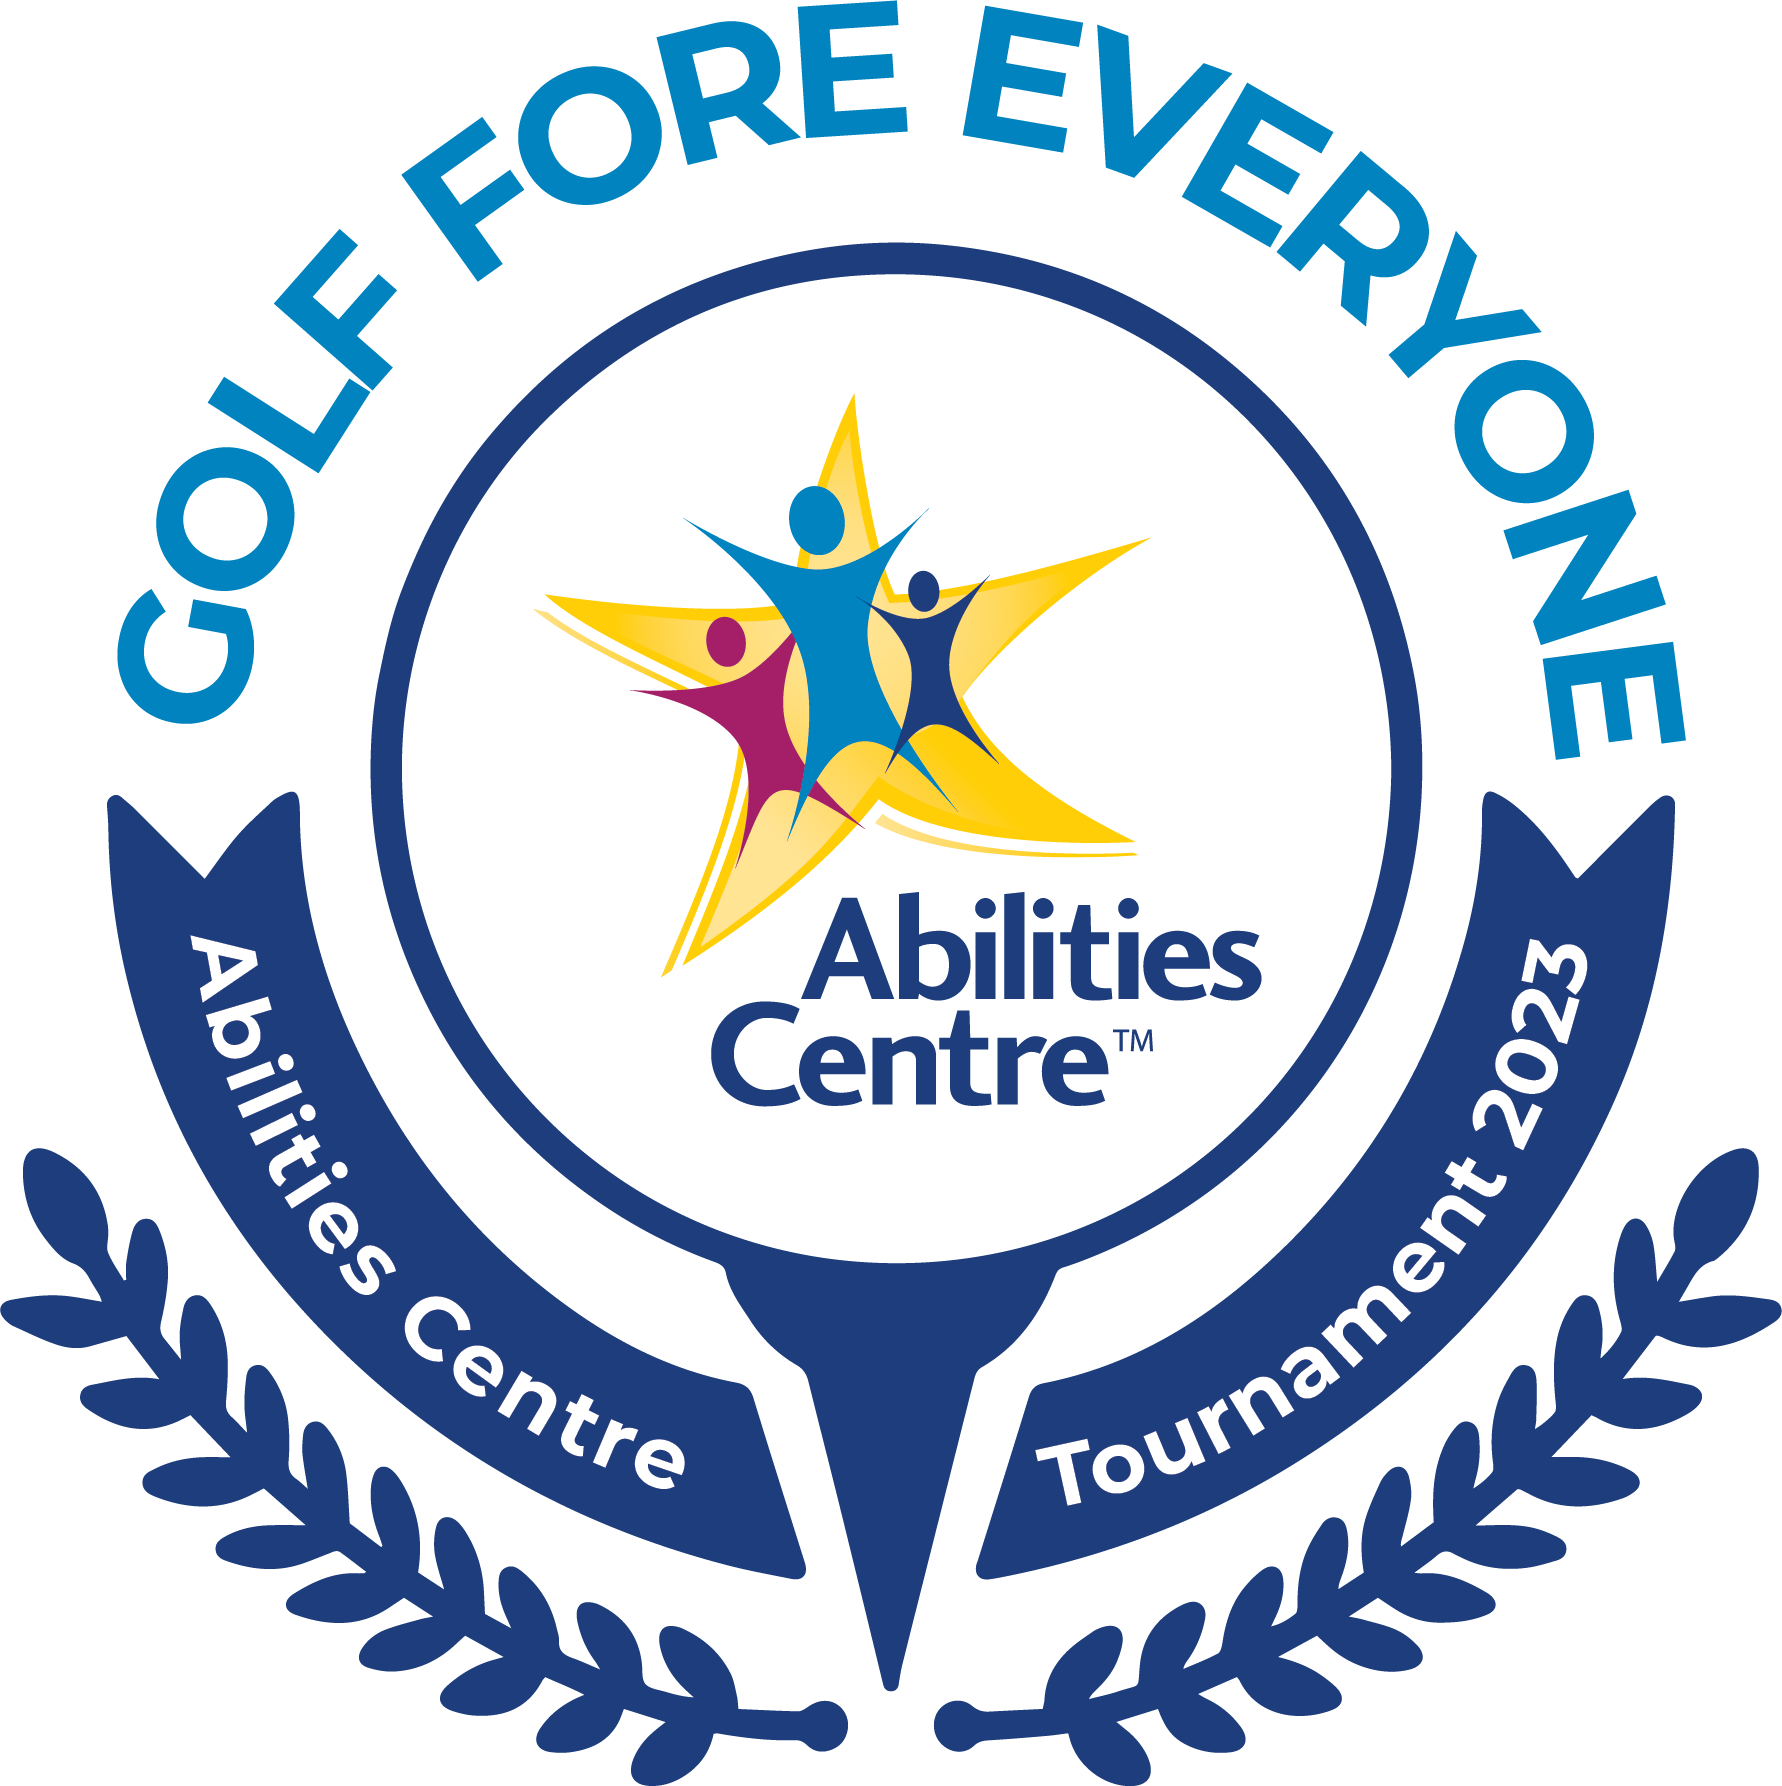 Golf Fore Everyone - Abilities Centre